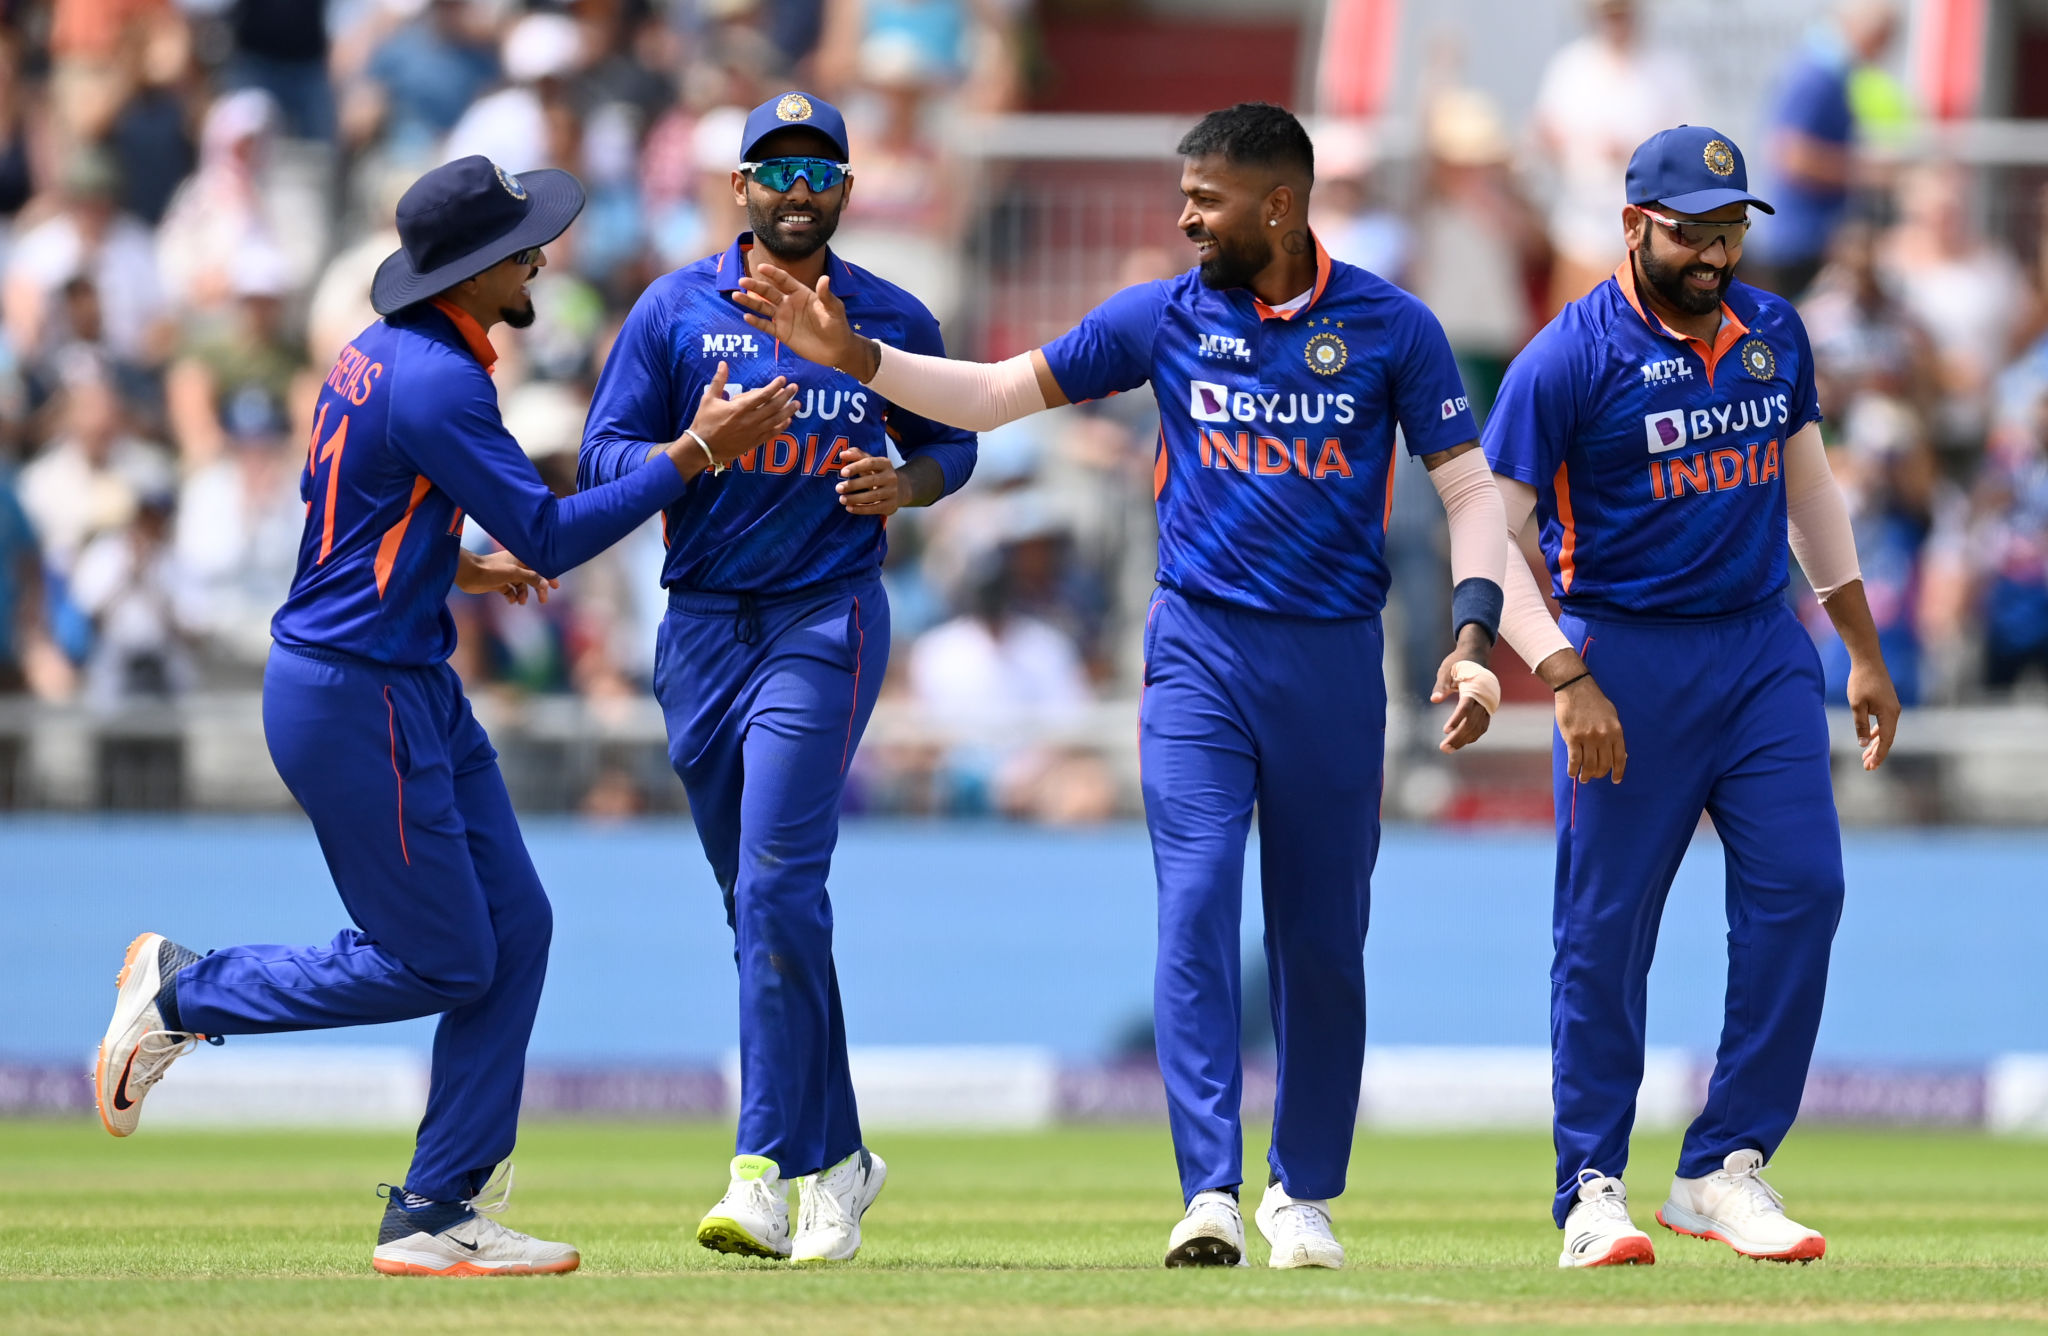 IND vs ENG LIVE: Rishabh Pant & Hardik Pandya power India to ODI SERIES win in England for first time in 8 years: Check INDIA ENGLAND 3rd ODI Highlights